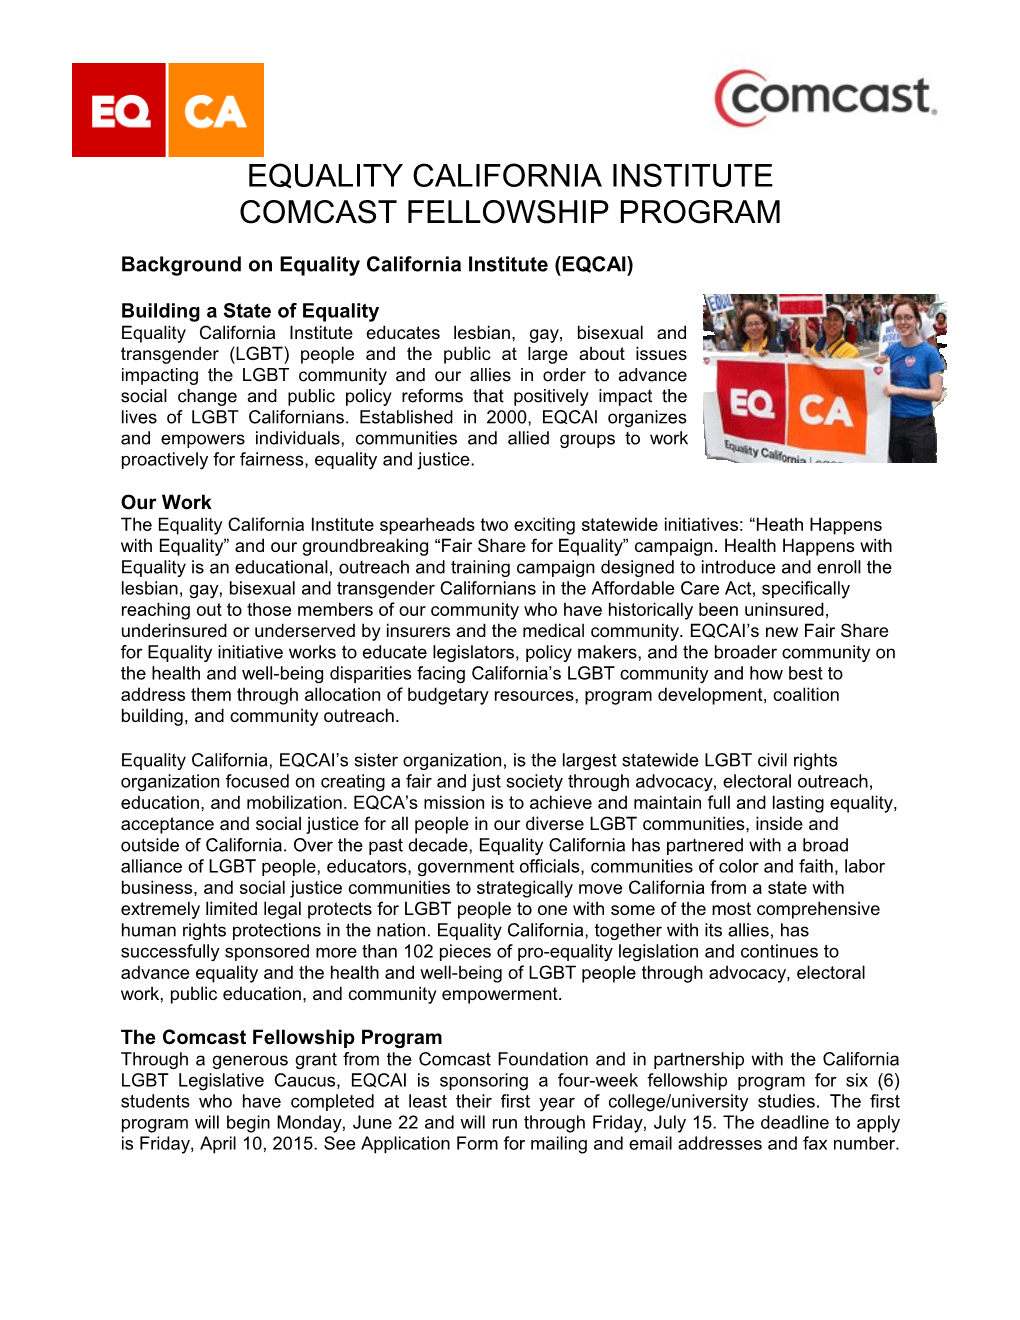 Background on Equality California Institute (EQCAI)